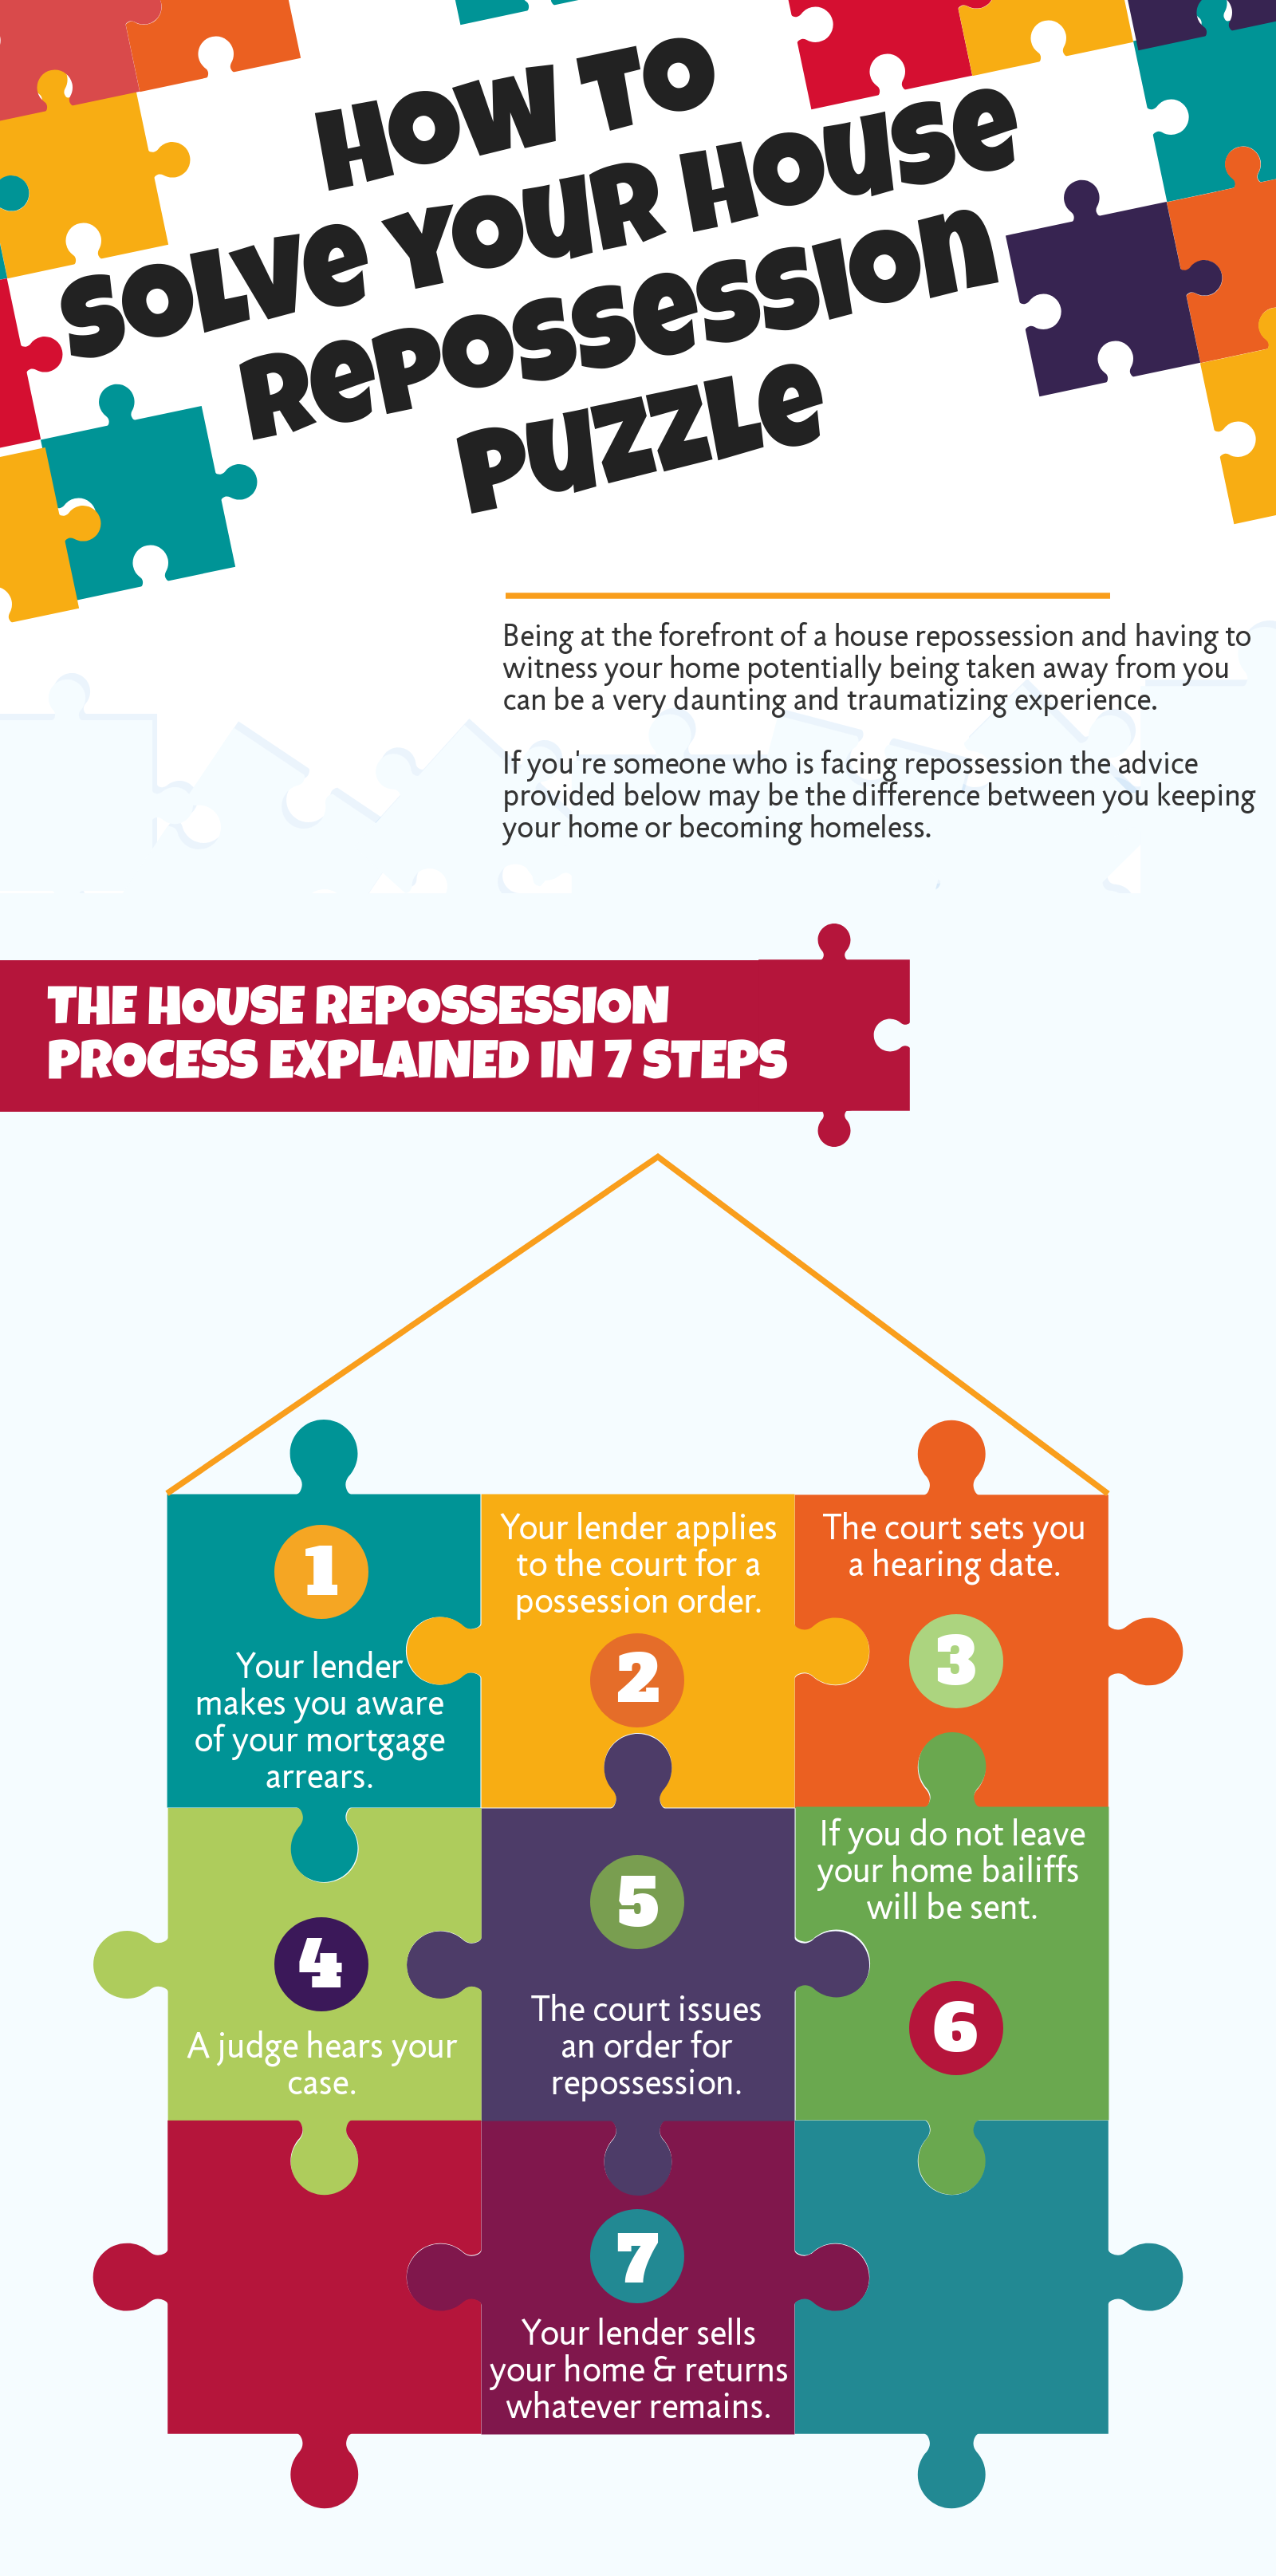 The house repossession process explained in 7 steps